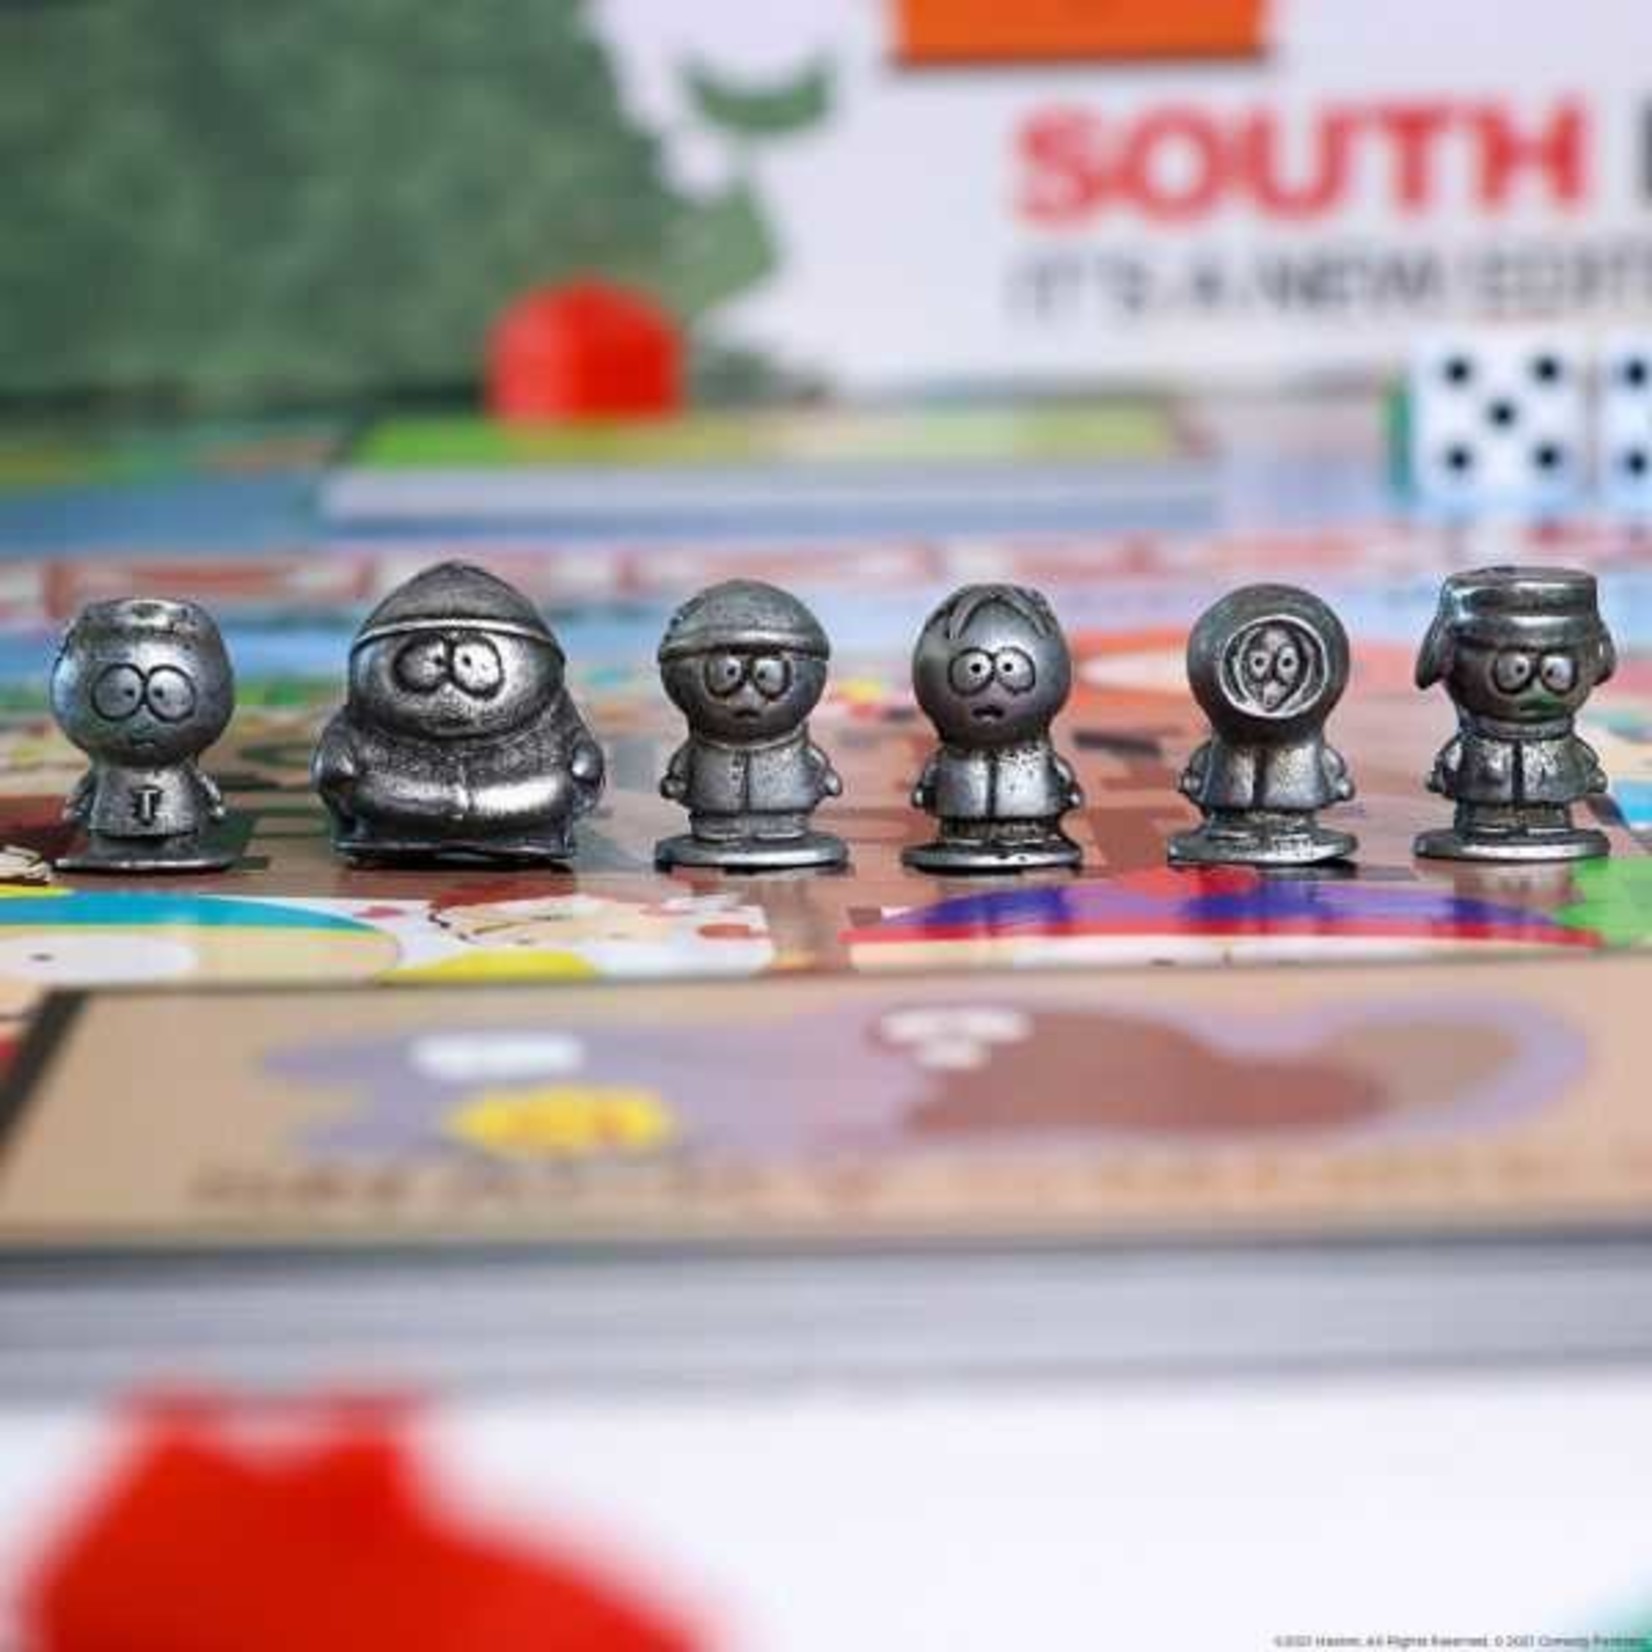 USAoploy Monopoly: South Park